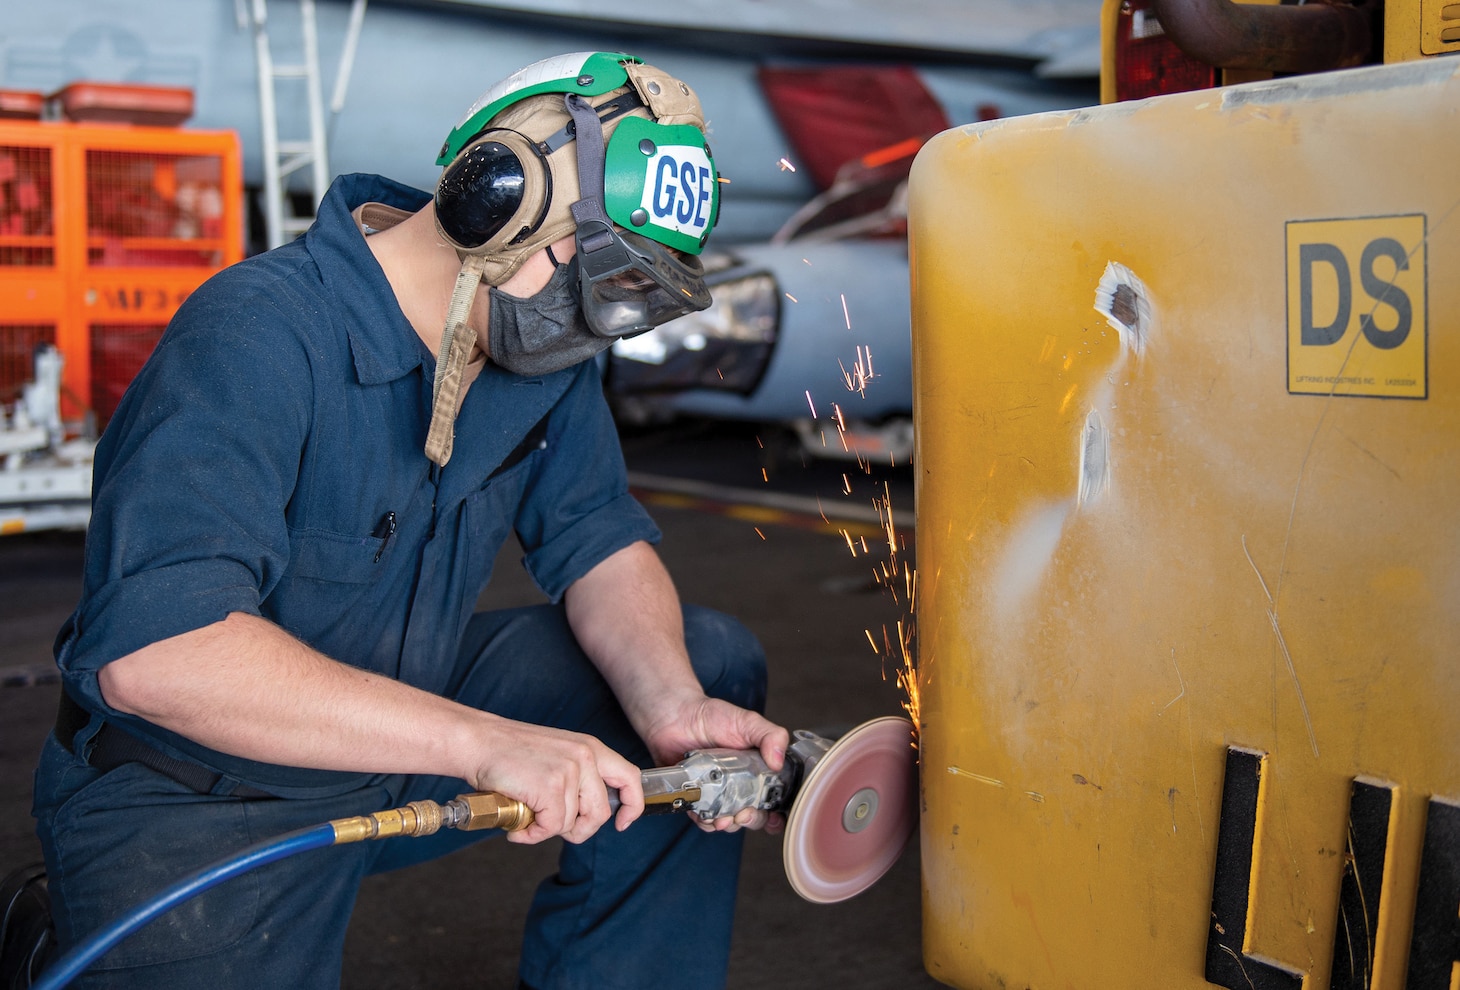 Aviation Support Equipment Technician Seaman Apprentice Zachary Owen, from Frederick, Maryland, uses an angle grinder to remove corrosion from a forklift in the hangar bay of the Nimitz-class aircraft carrier USS Harry S. Truman (CVN 75), Dec. 15, 2021.